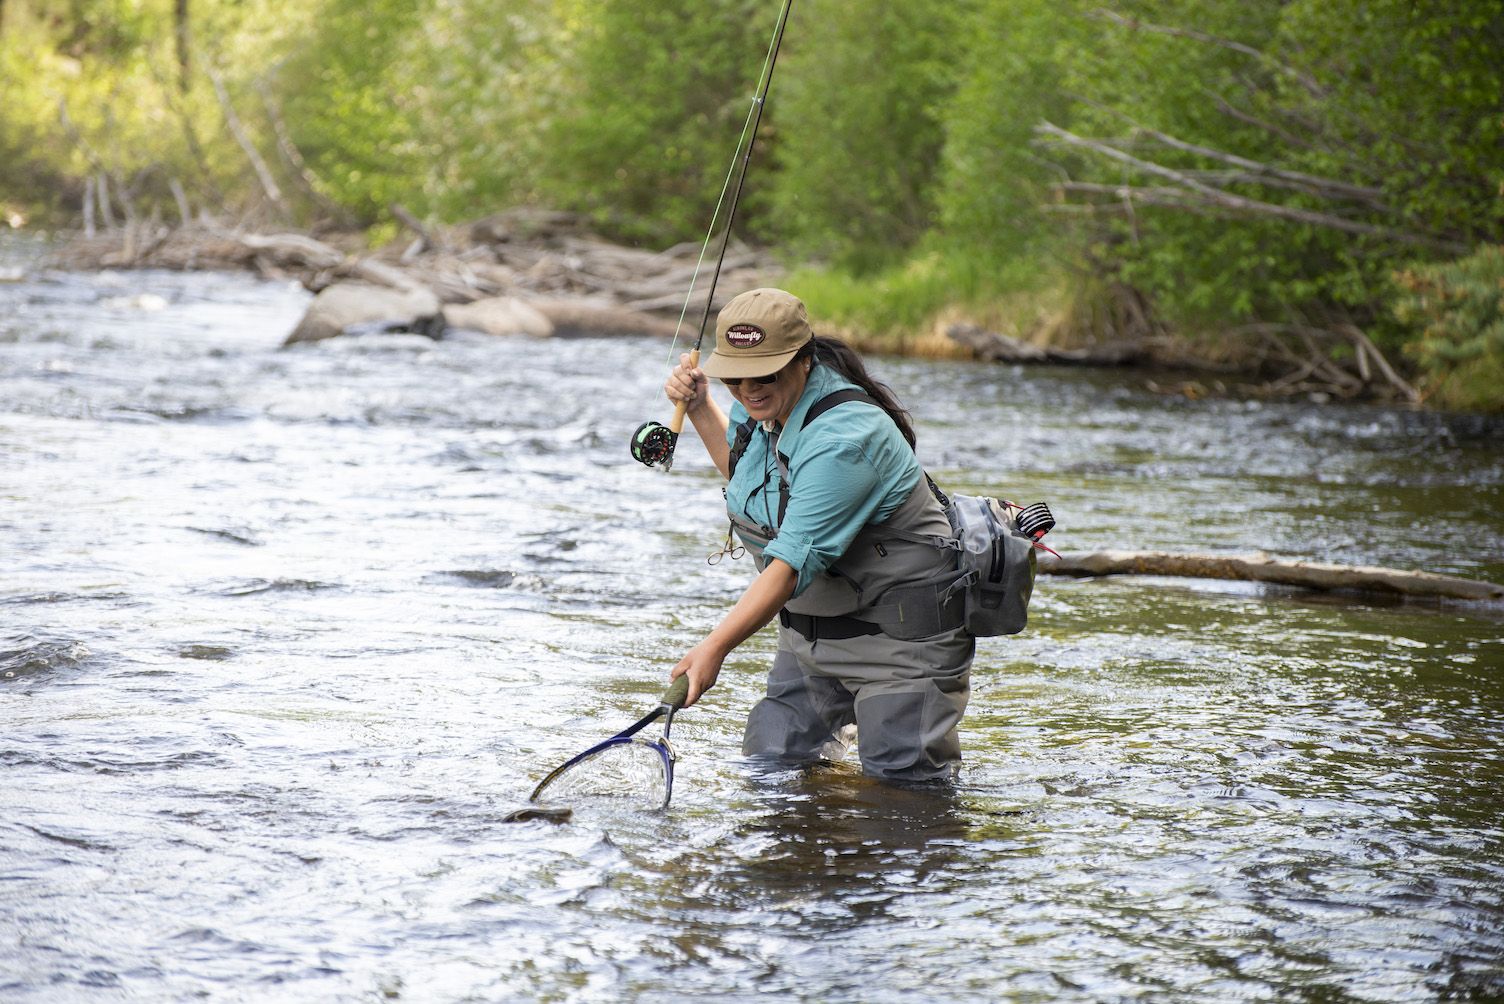 A woman fly fishing on the taylor river